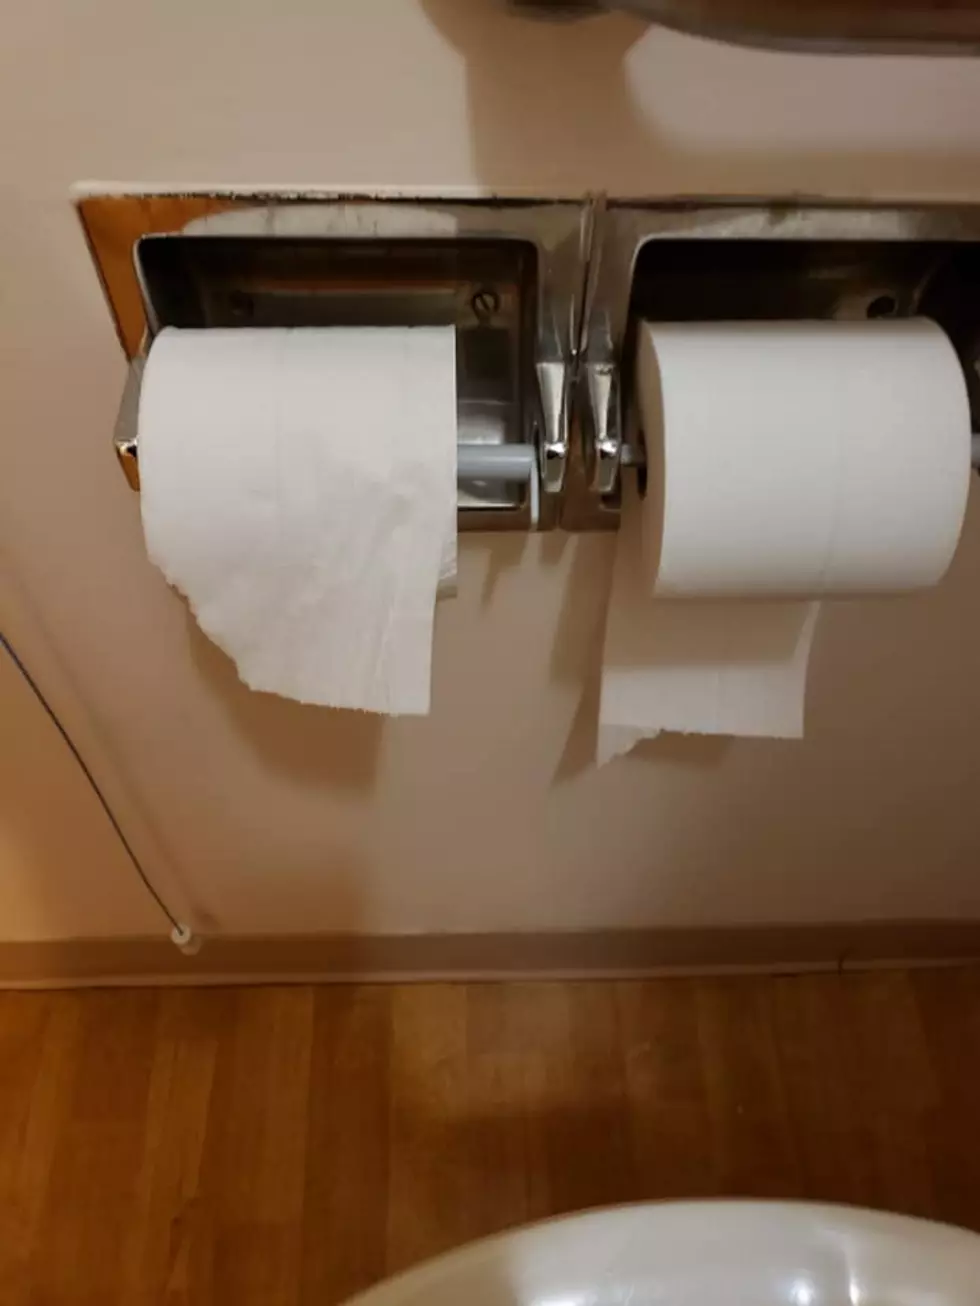 The Great Toilet Paper Debate: Over or Under?